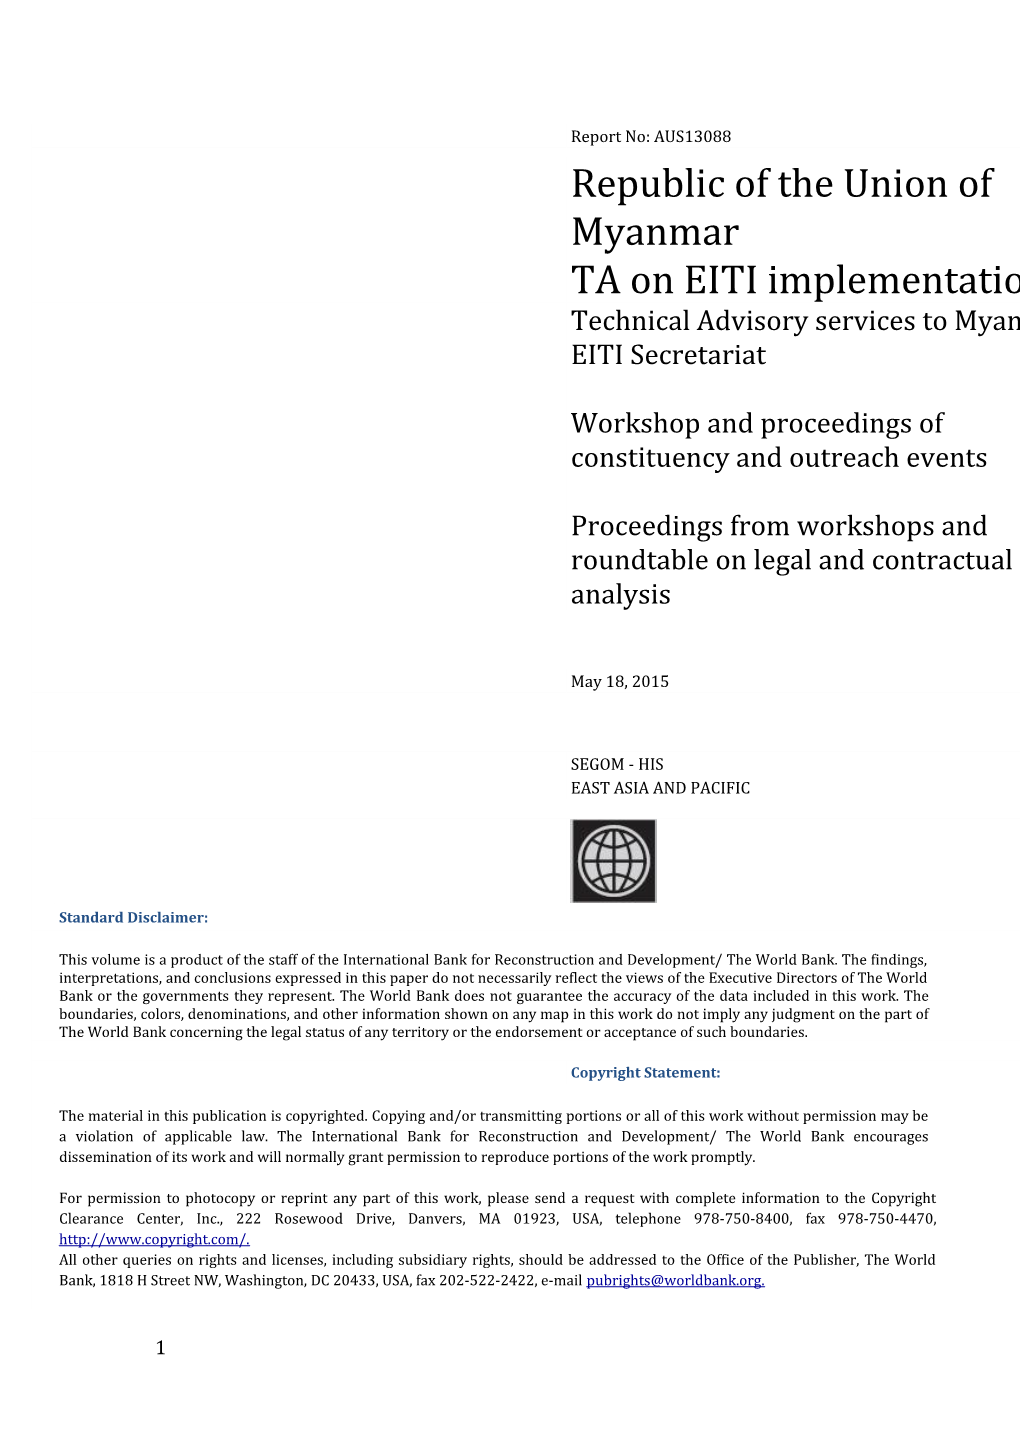 I. Consolidated Report - EITI Preparation Support for Myanmar 4